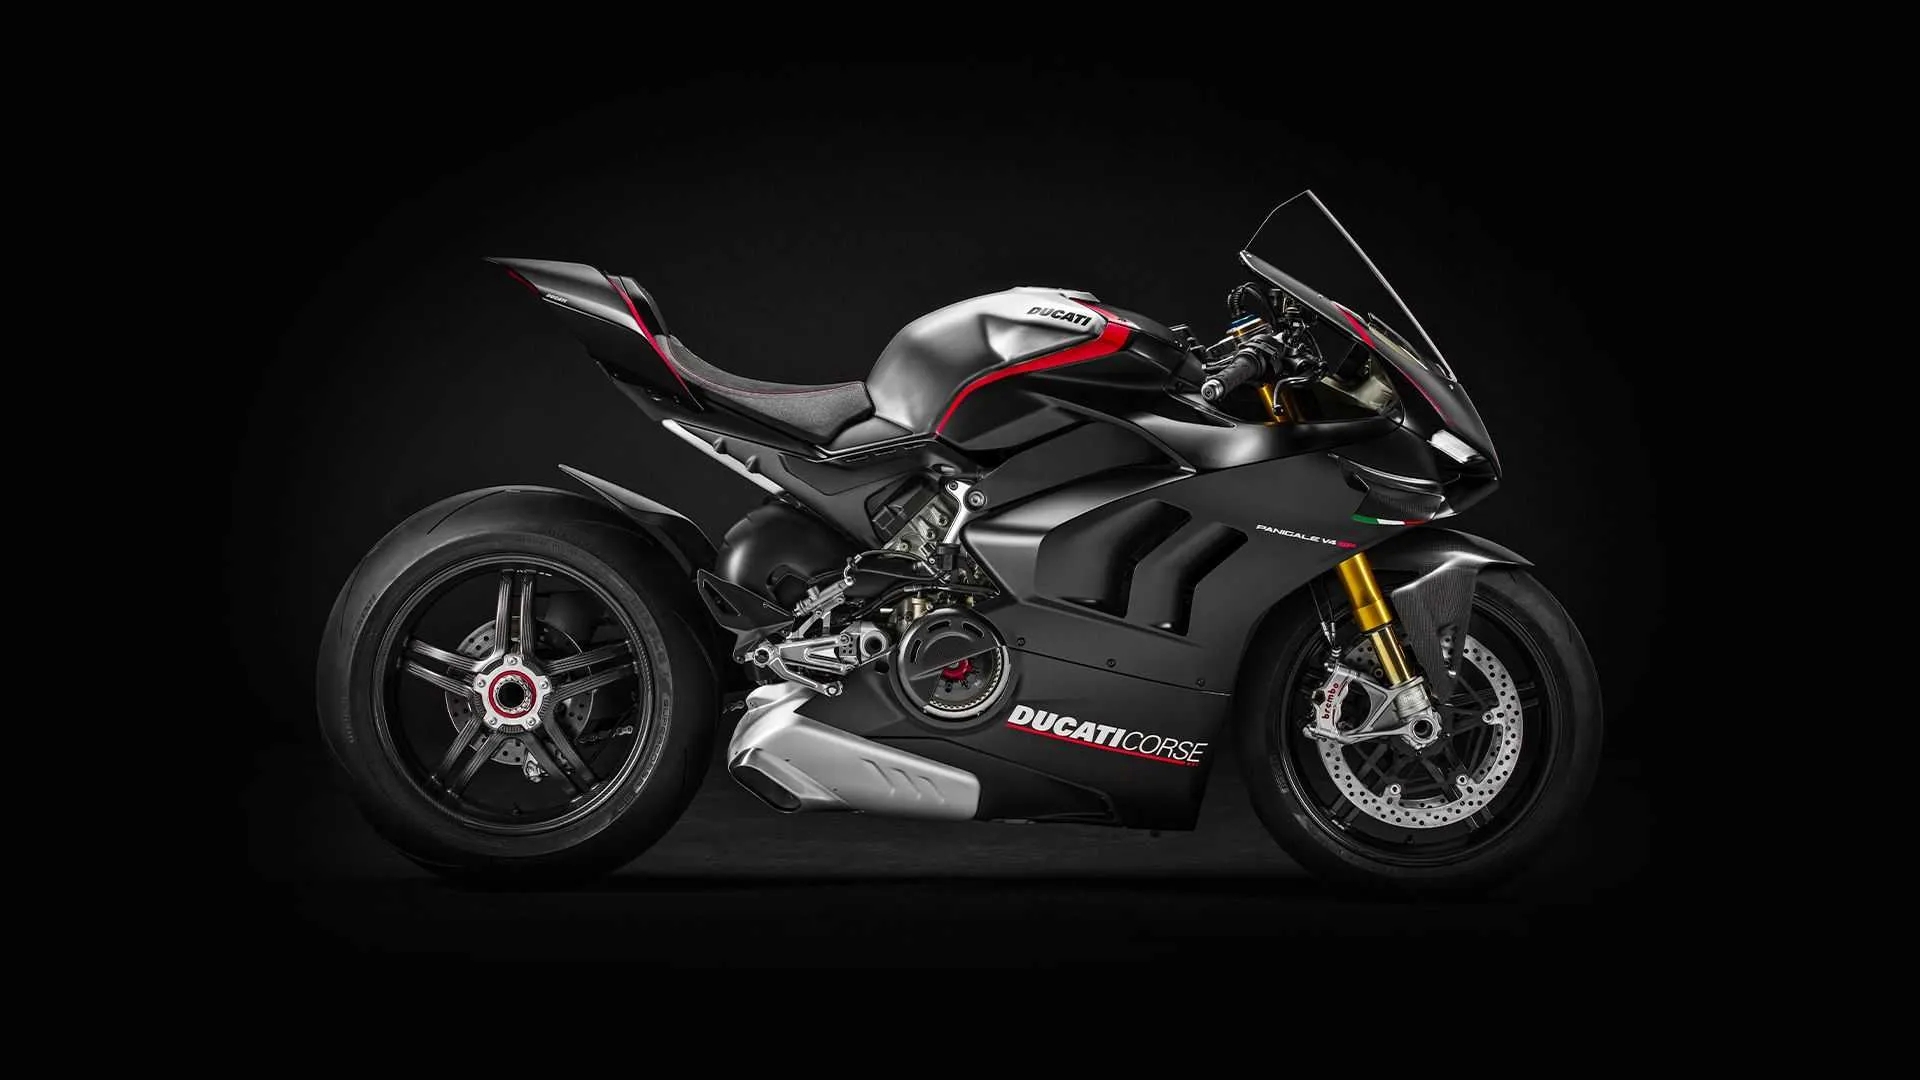 Focus on highlights of Panigale V4 carbon fiber post thumbnail image